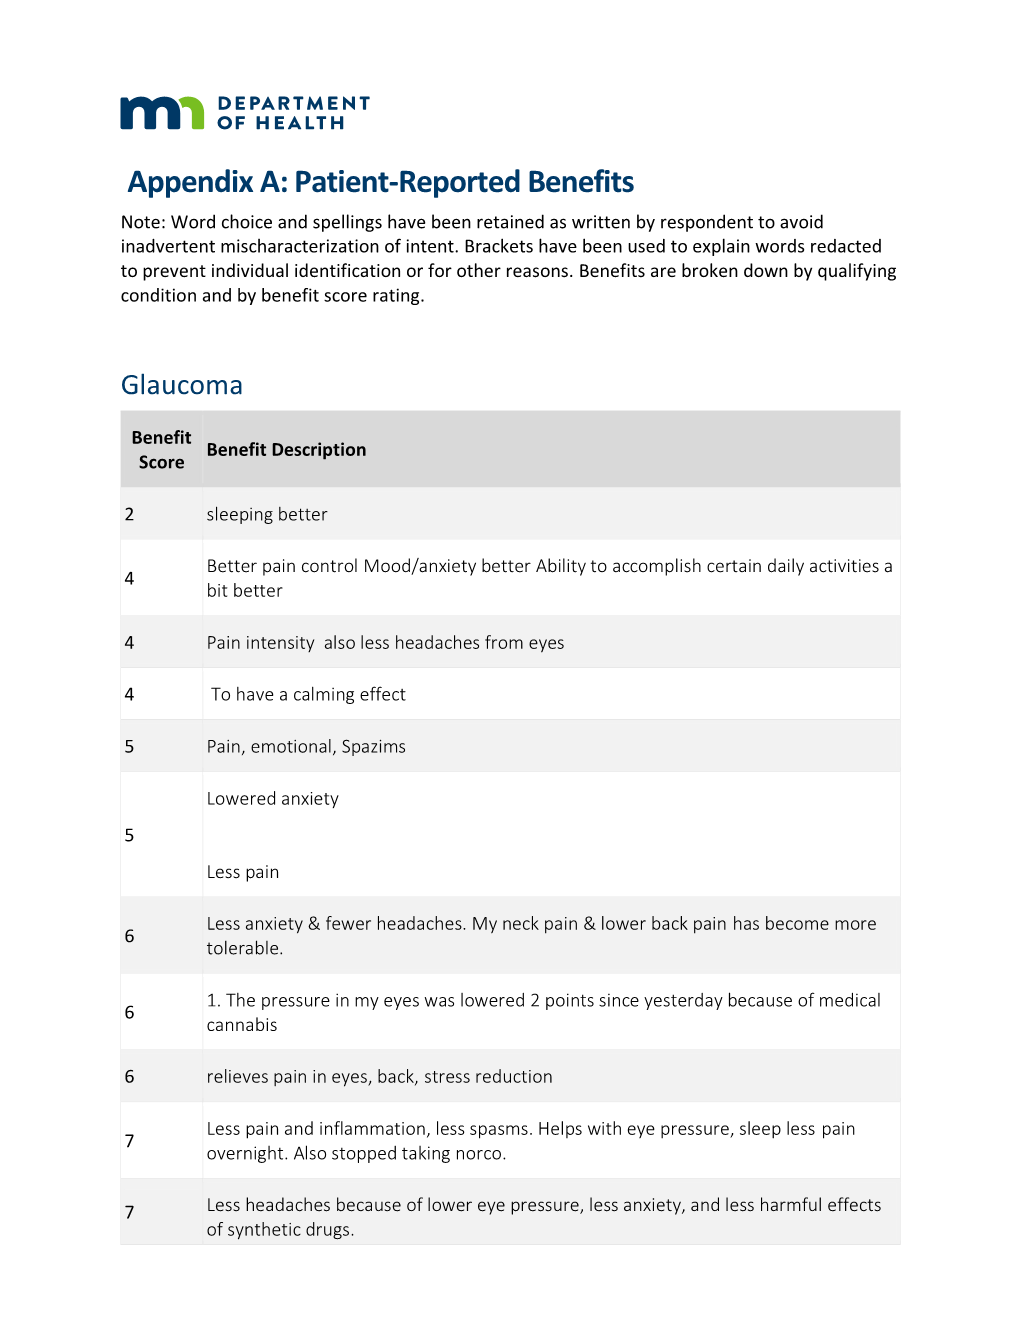 Patient-Reported Benefits Note: Word Choice and Spellings Have Been Retained As Written by Respondent to Avoid Inadvertent Mischaracterization of Intent